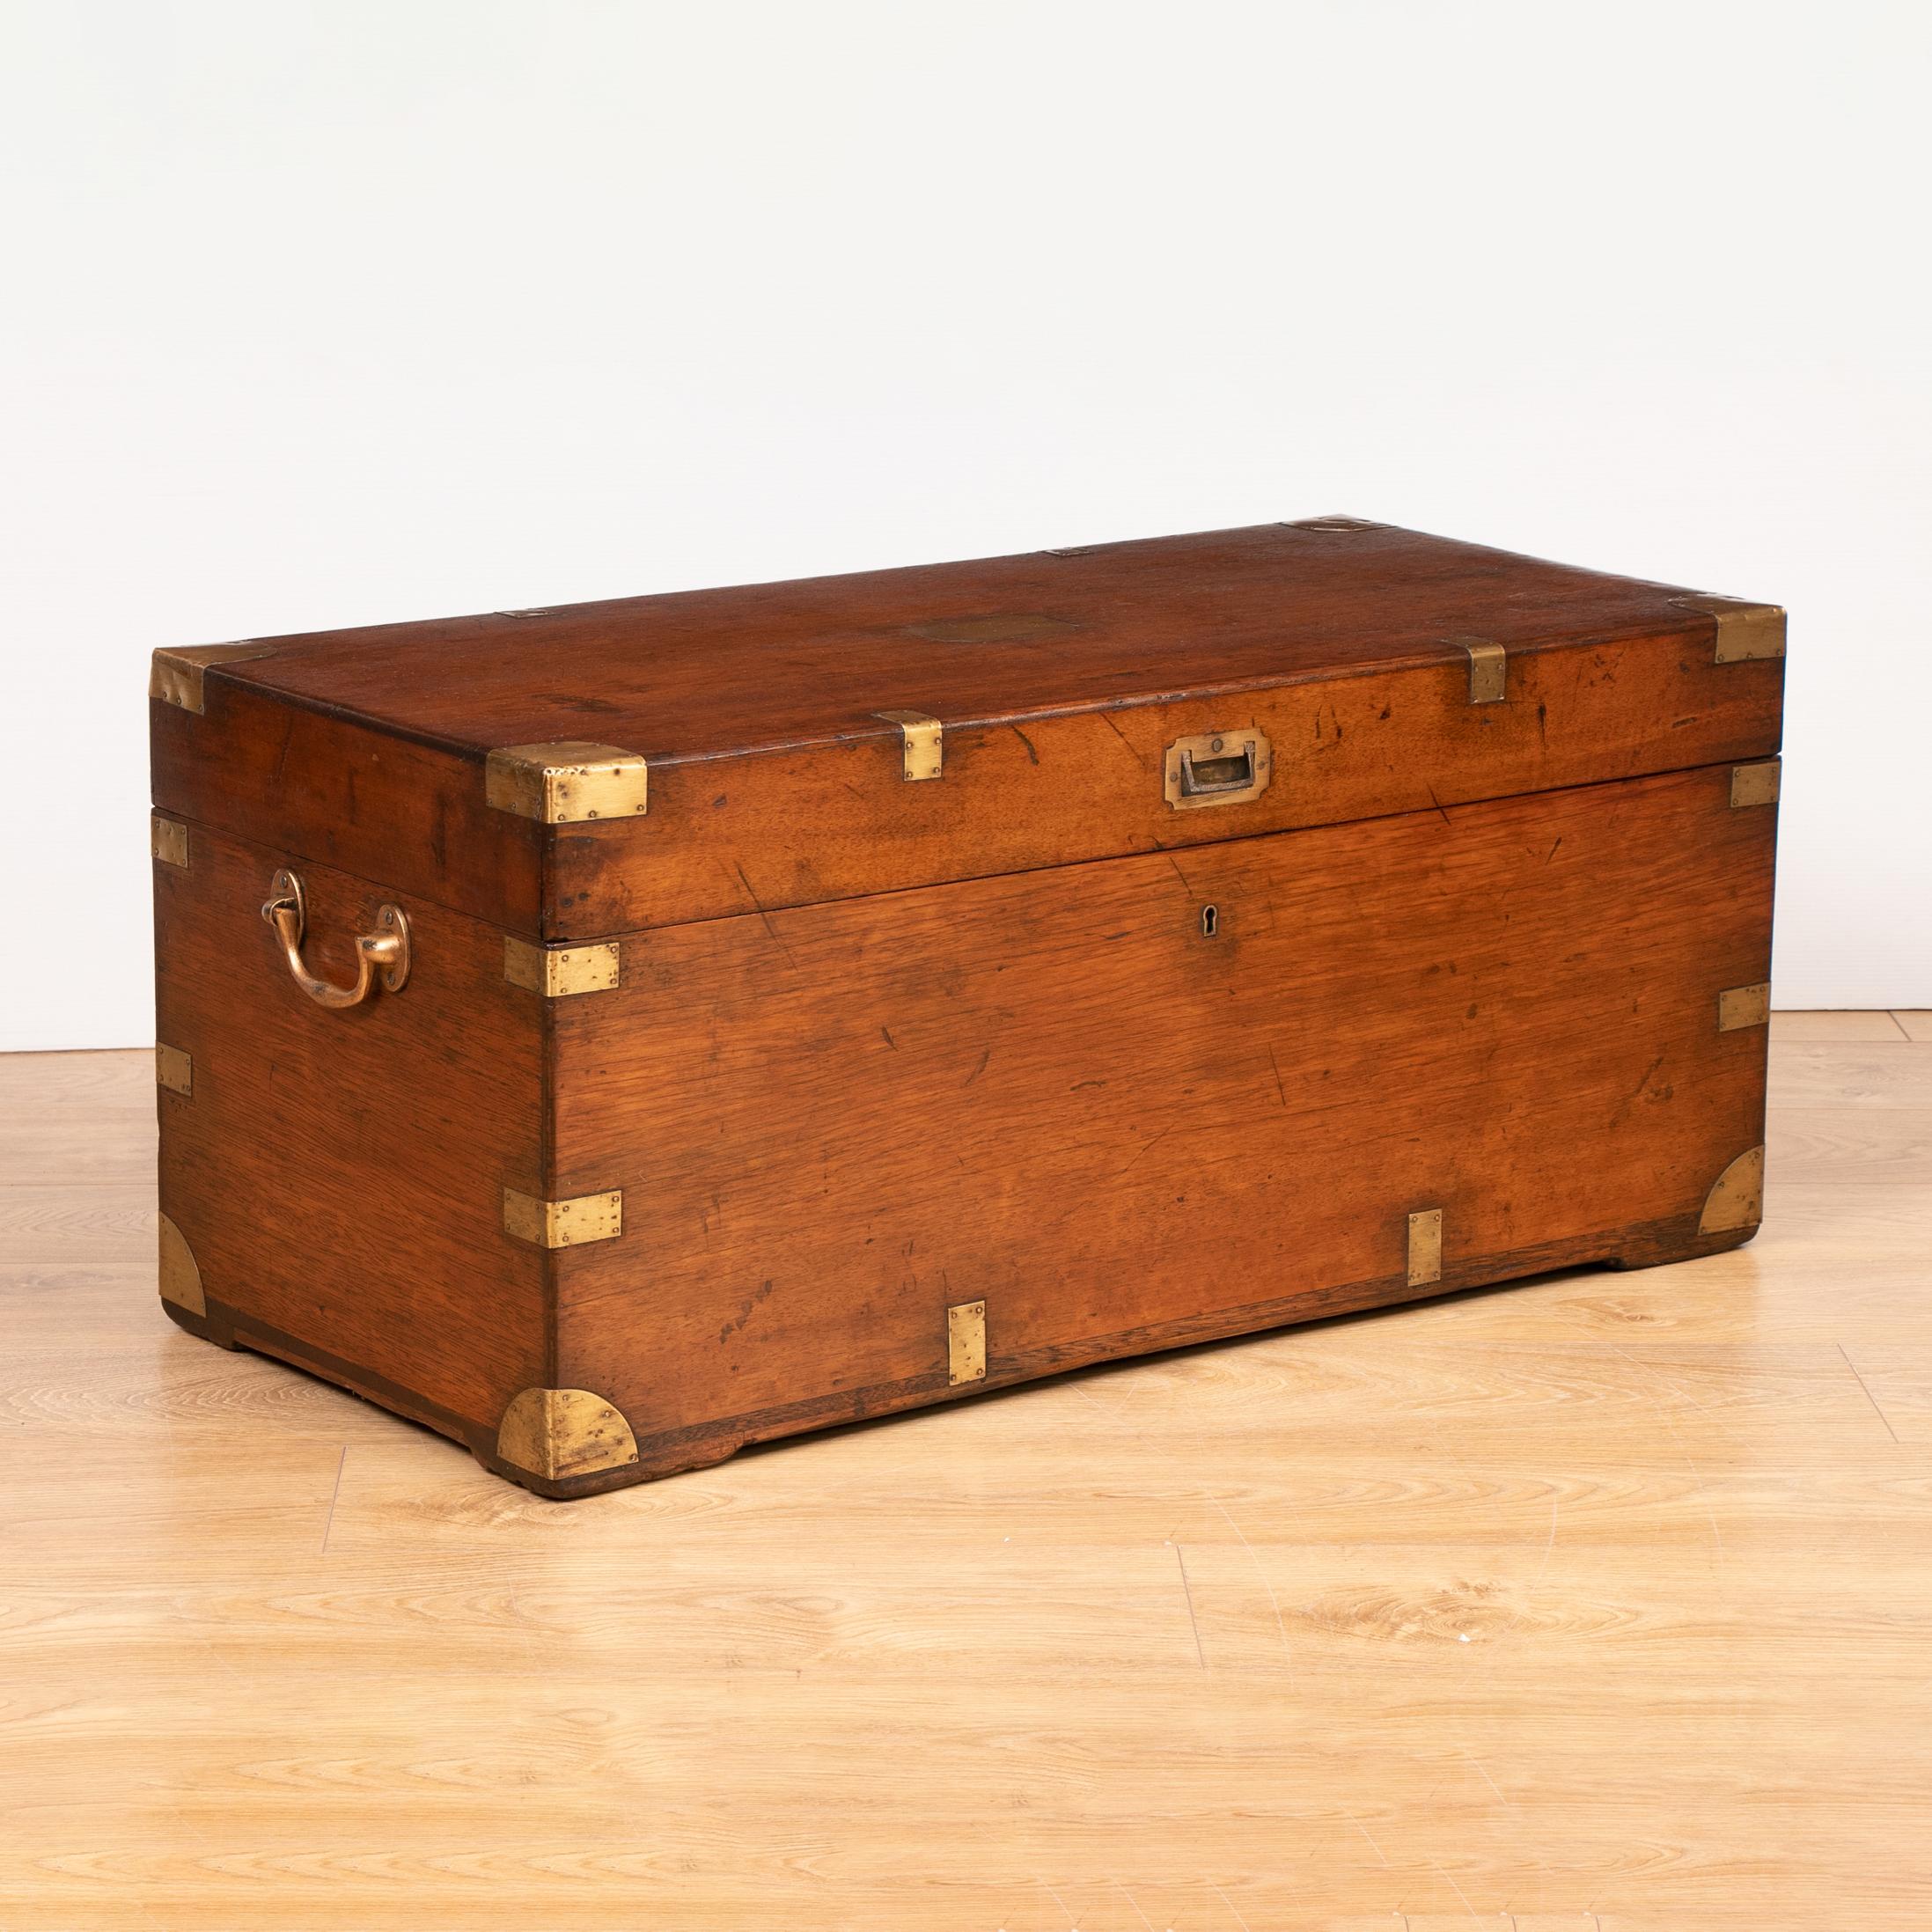 A 19th century brass bound military Campaign chest or trunk fully restored and bespoke French polished.
 